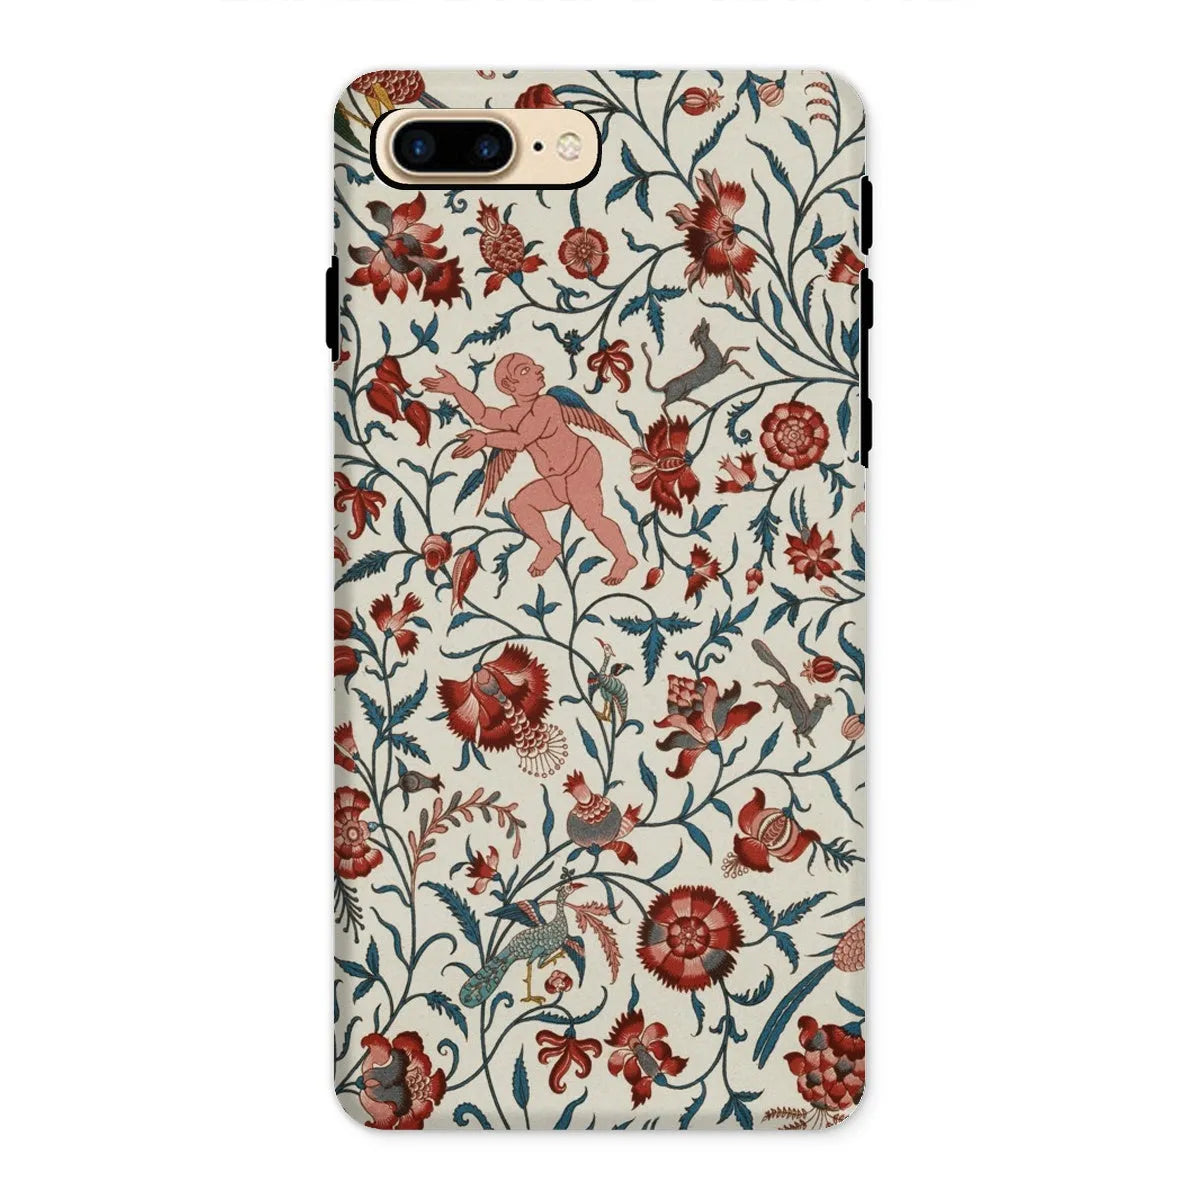 Persian Pattern From L’ornement Polychrome By Auguste Racinet Tough Phone Case - Iphone 8 Plus / Matte - Mobile Phone